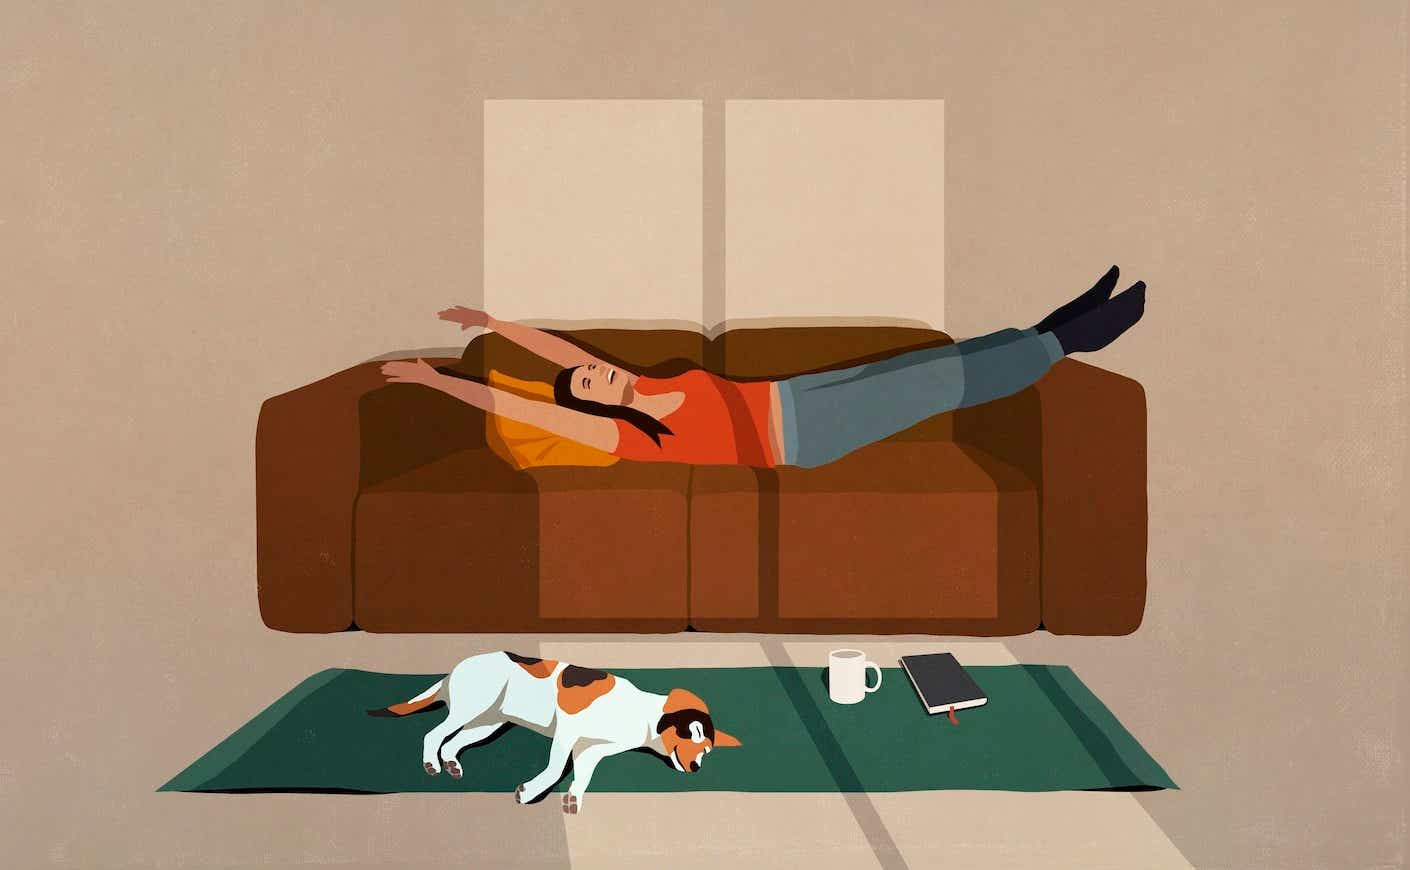 A woman stretches happily on a couch as a cat sleeps on a rug beneath her.